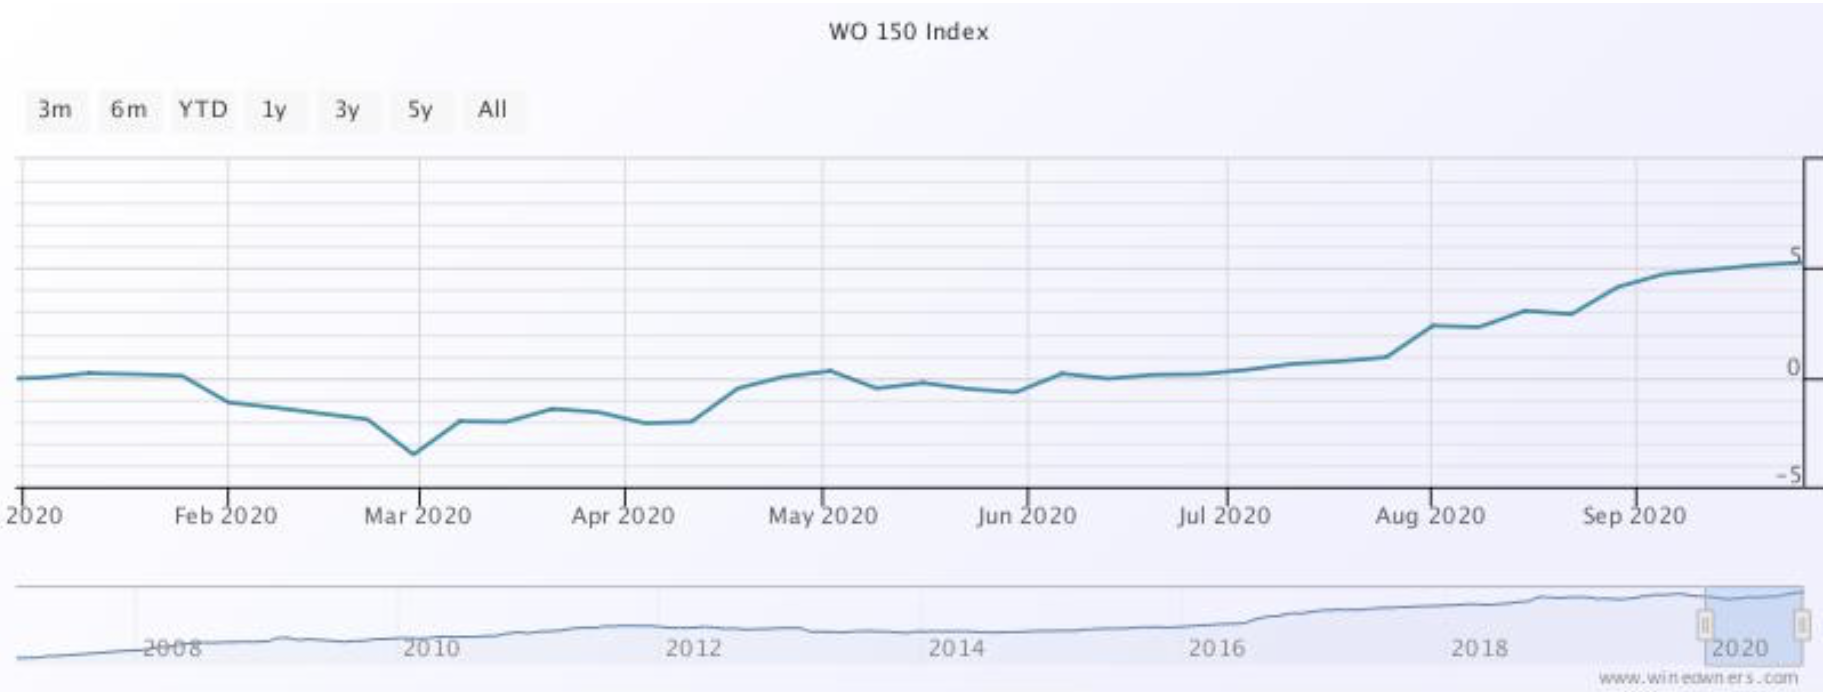 Wine Owners - WO150 Index Sept 2020